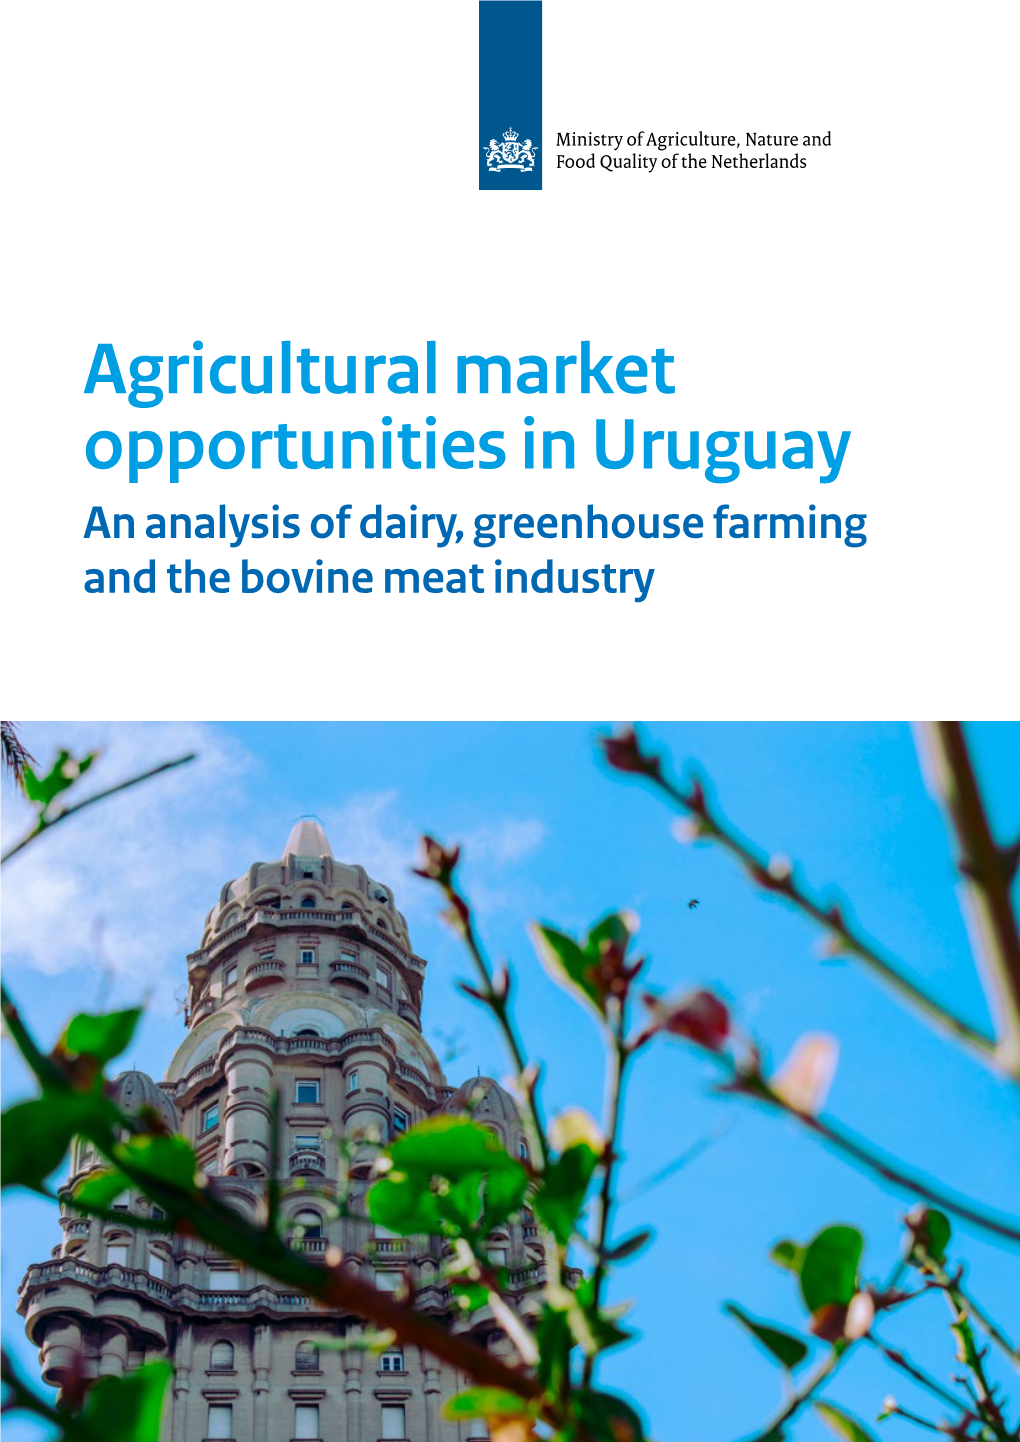 Agricultural Market Opportunities in Uruguay an Analysis of Dairy, Greenhouse Farming and the Bovine Meat Industry